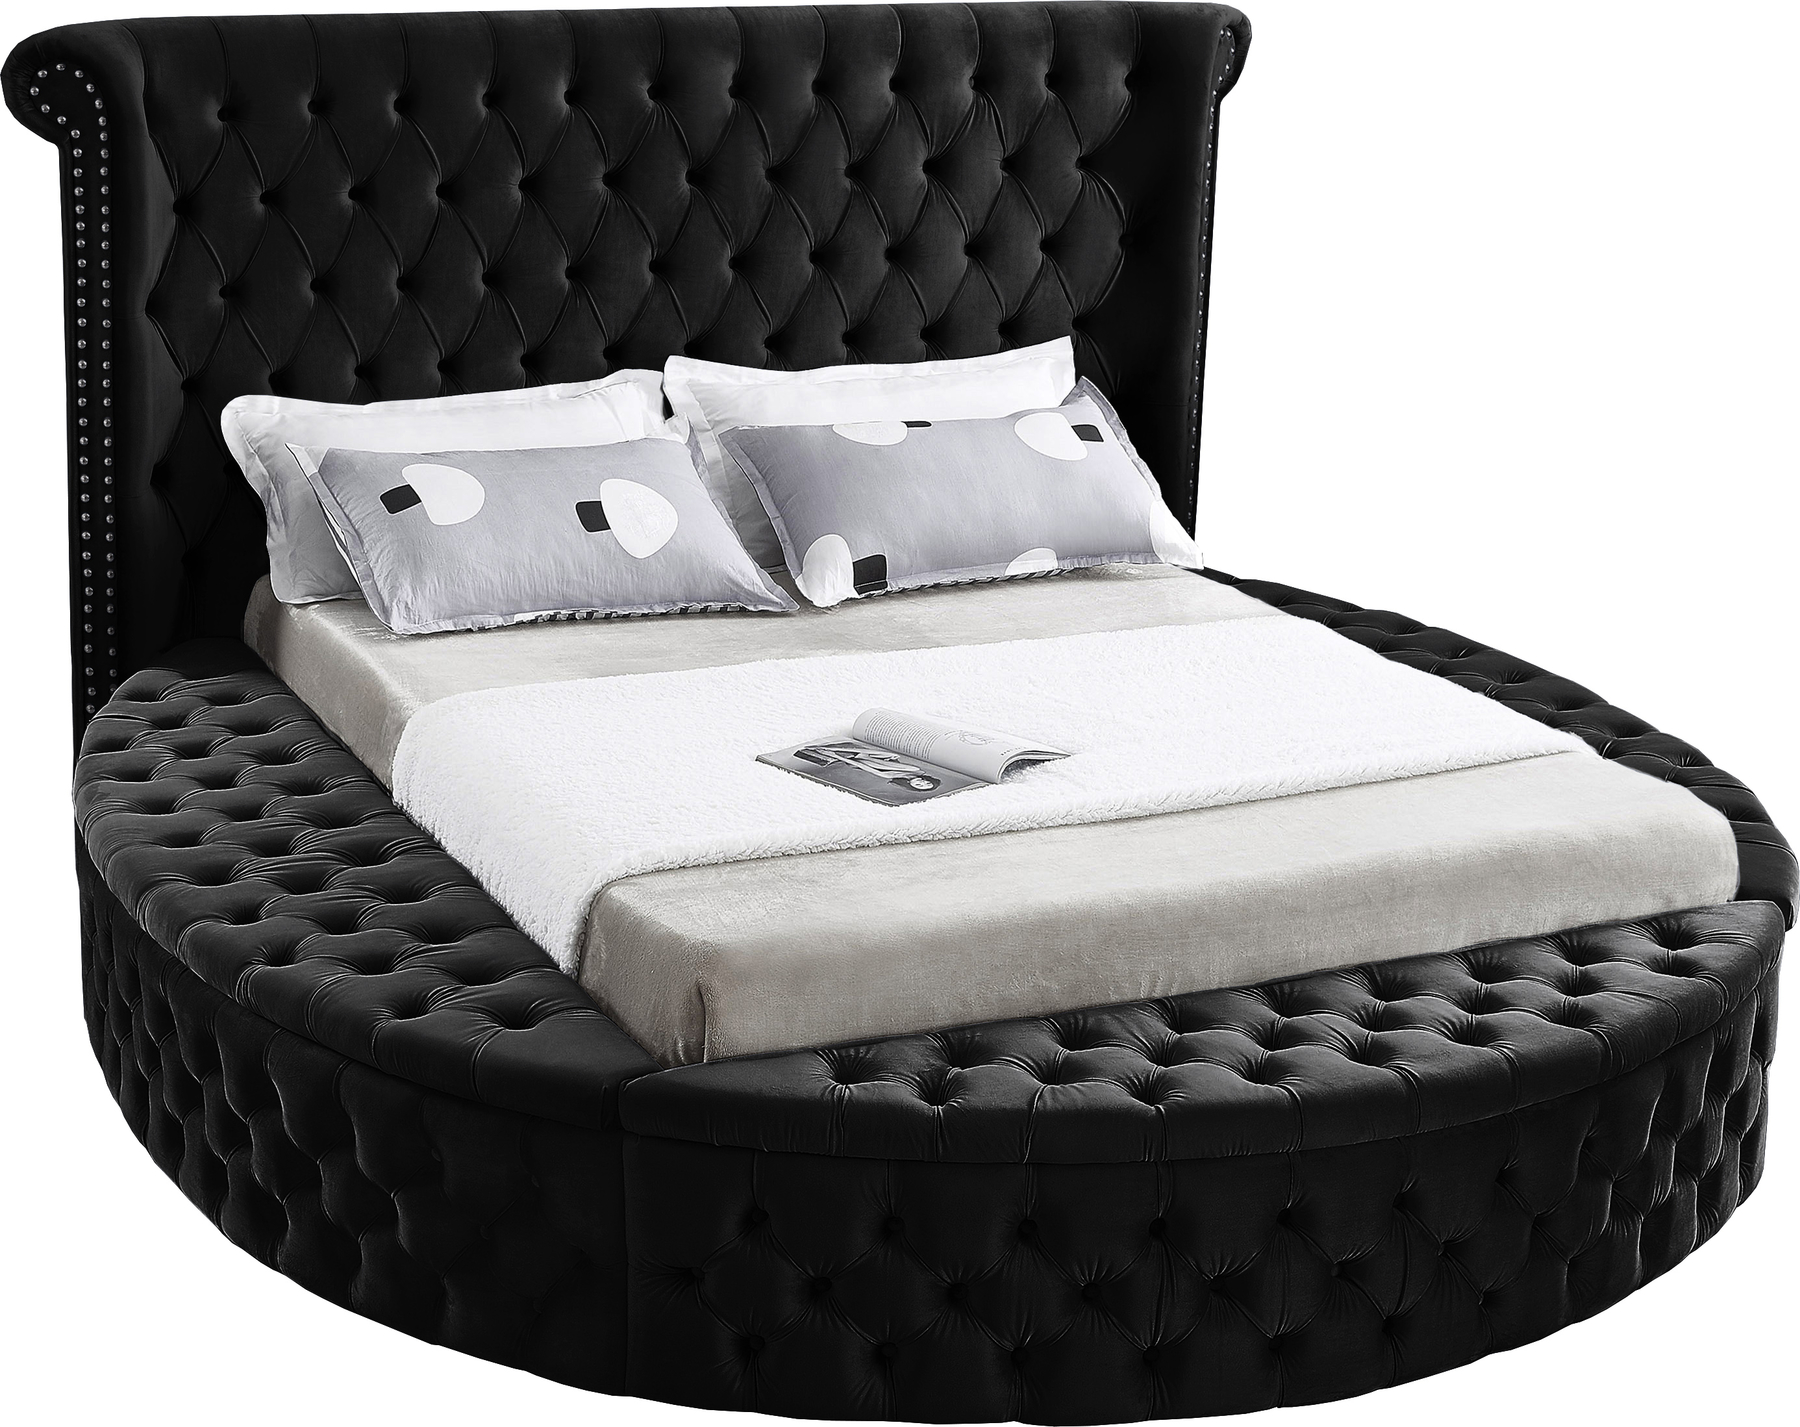 Meridian Luxus Black King Size Bed, What Size Bedding For King Single